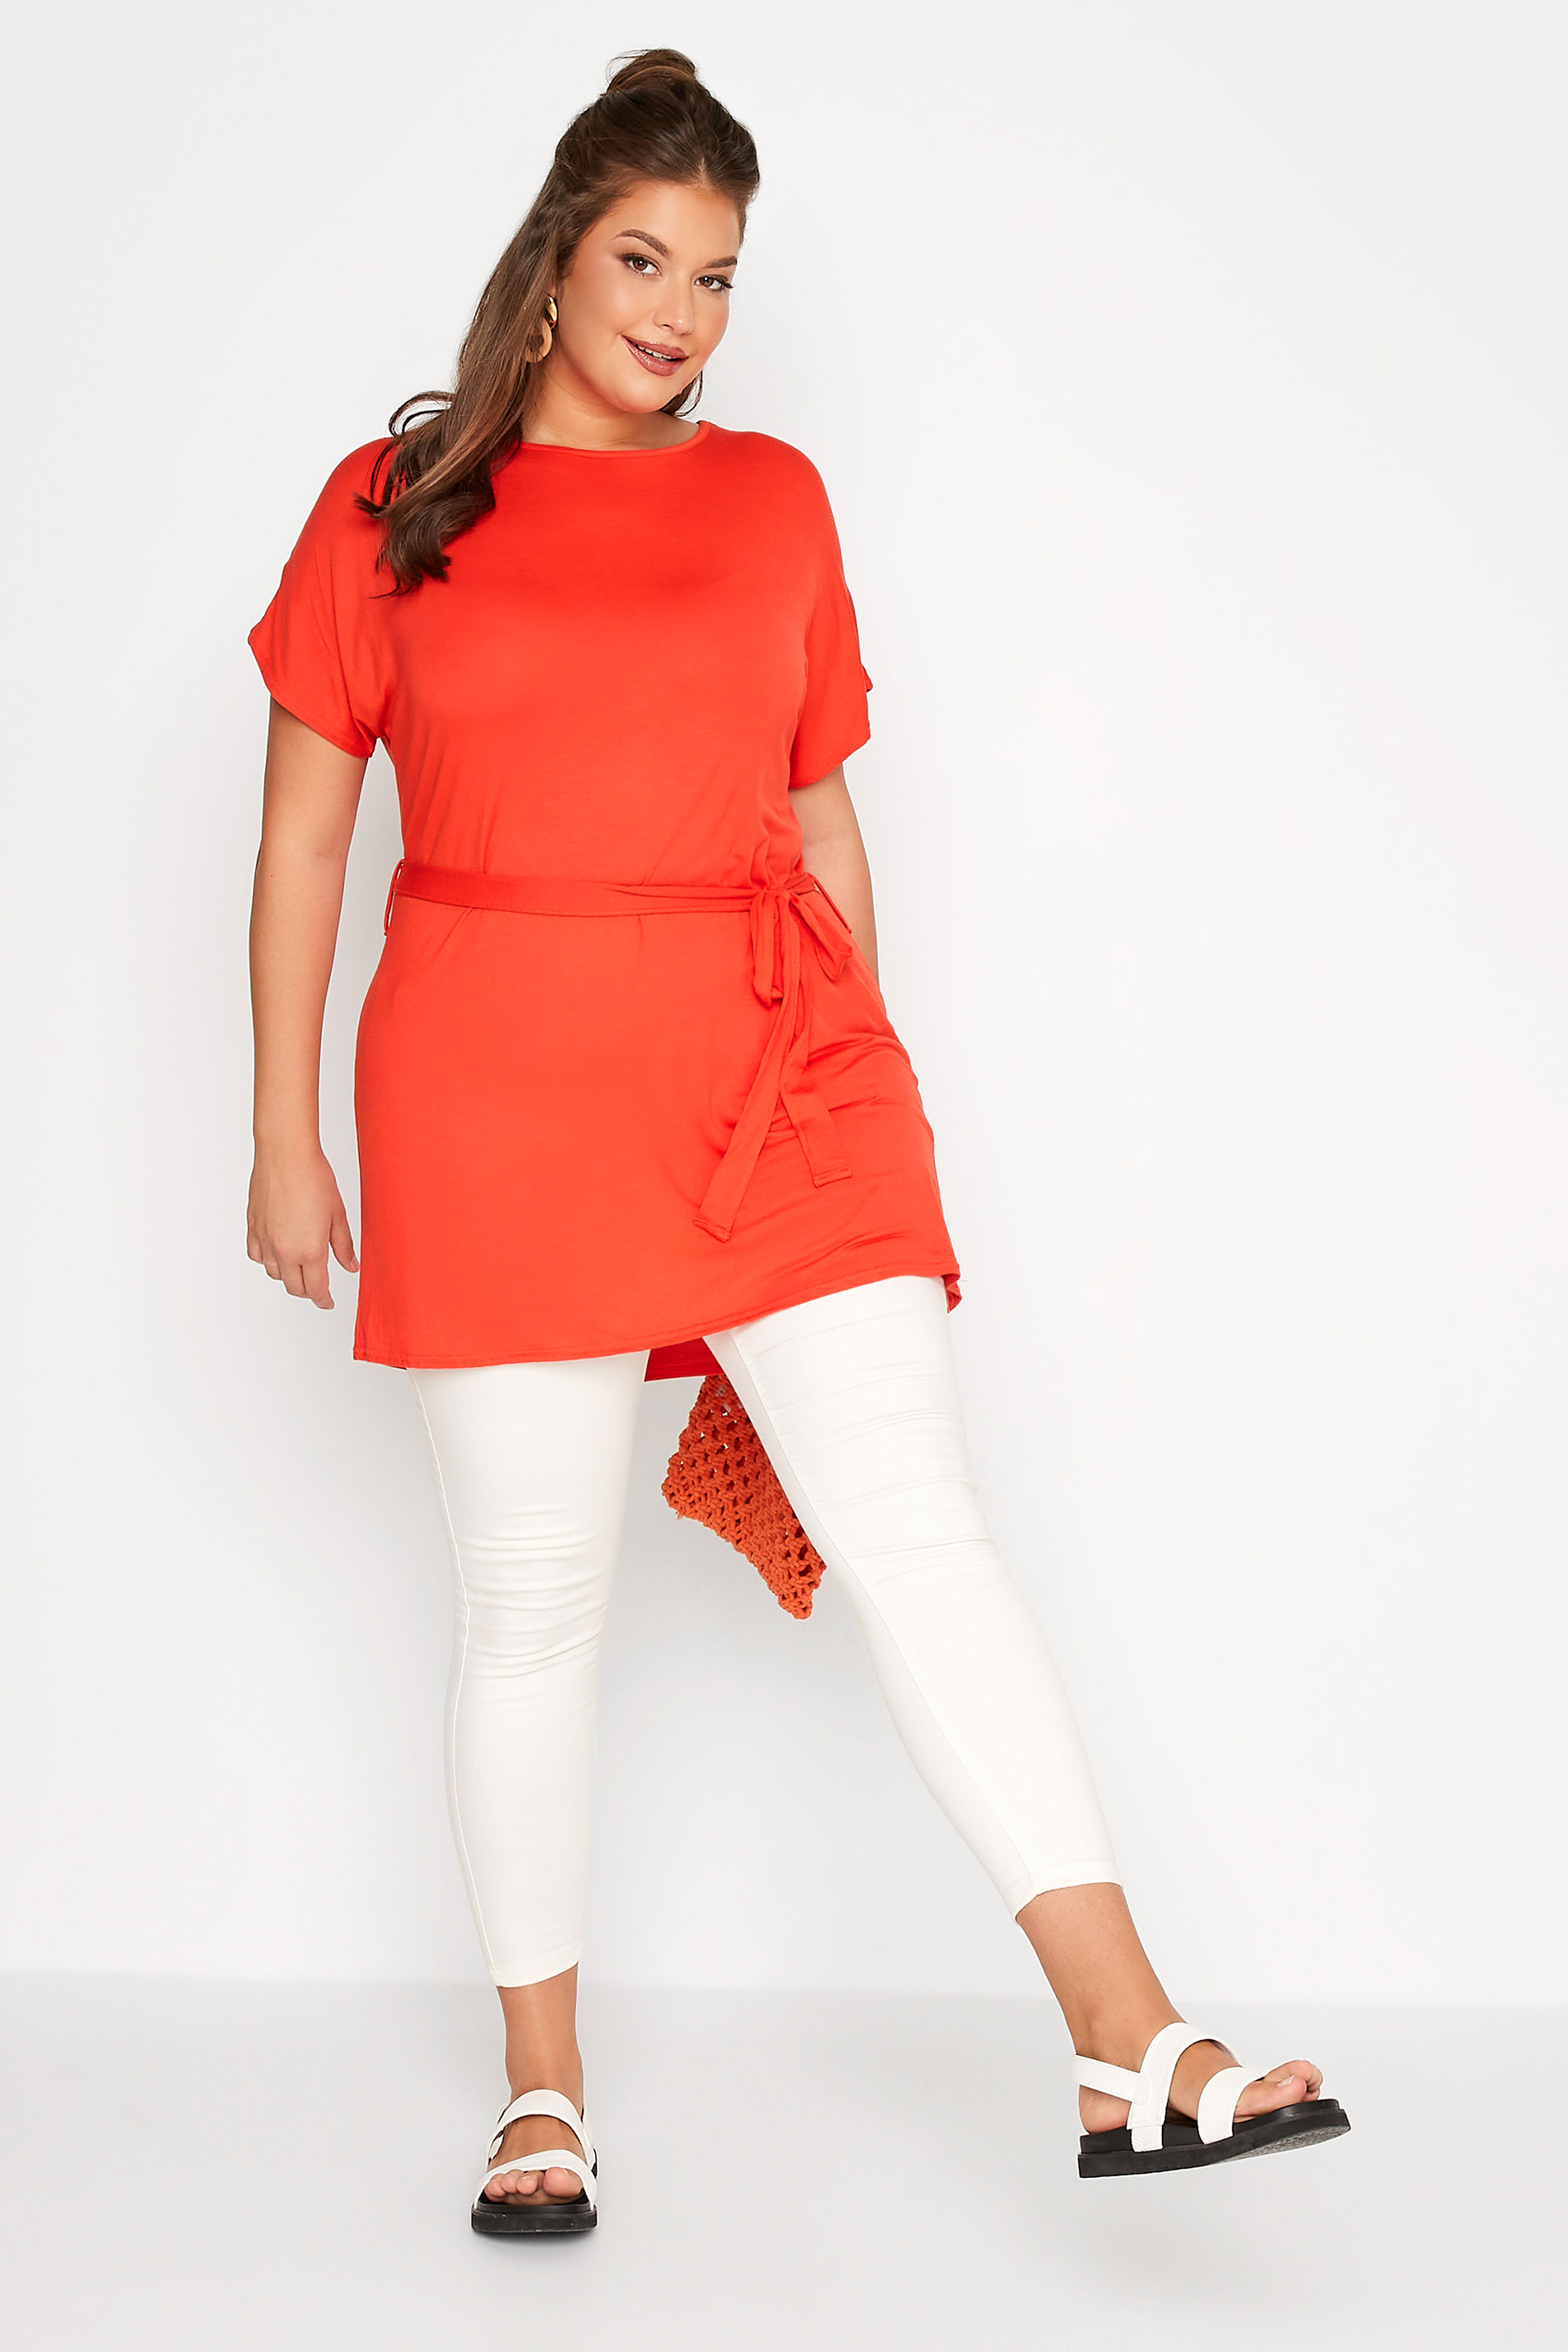 Grande taille  Tops Grande taille  Tops Casual | LIMITED COLLECTION Curve Orange Waist Tie Top - PZ92366